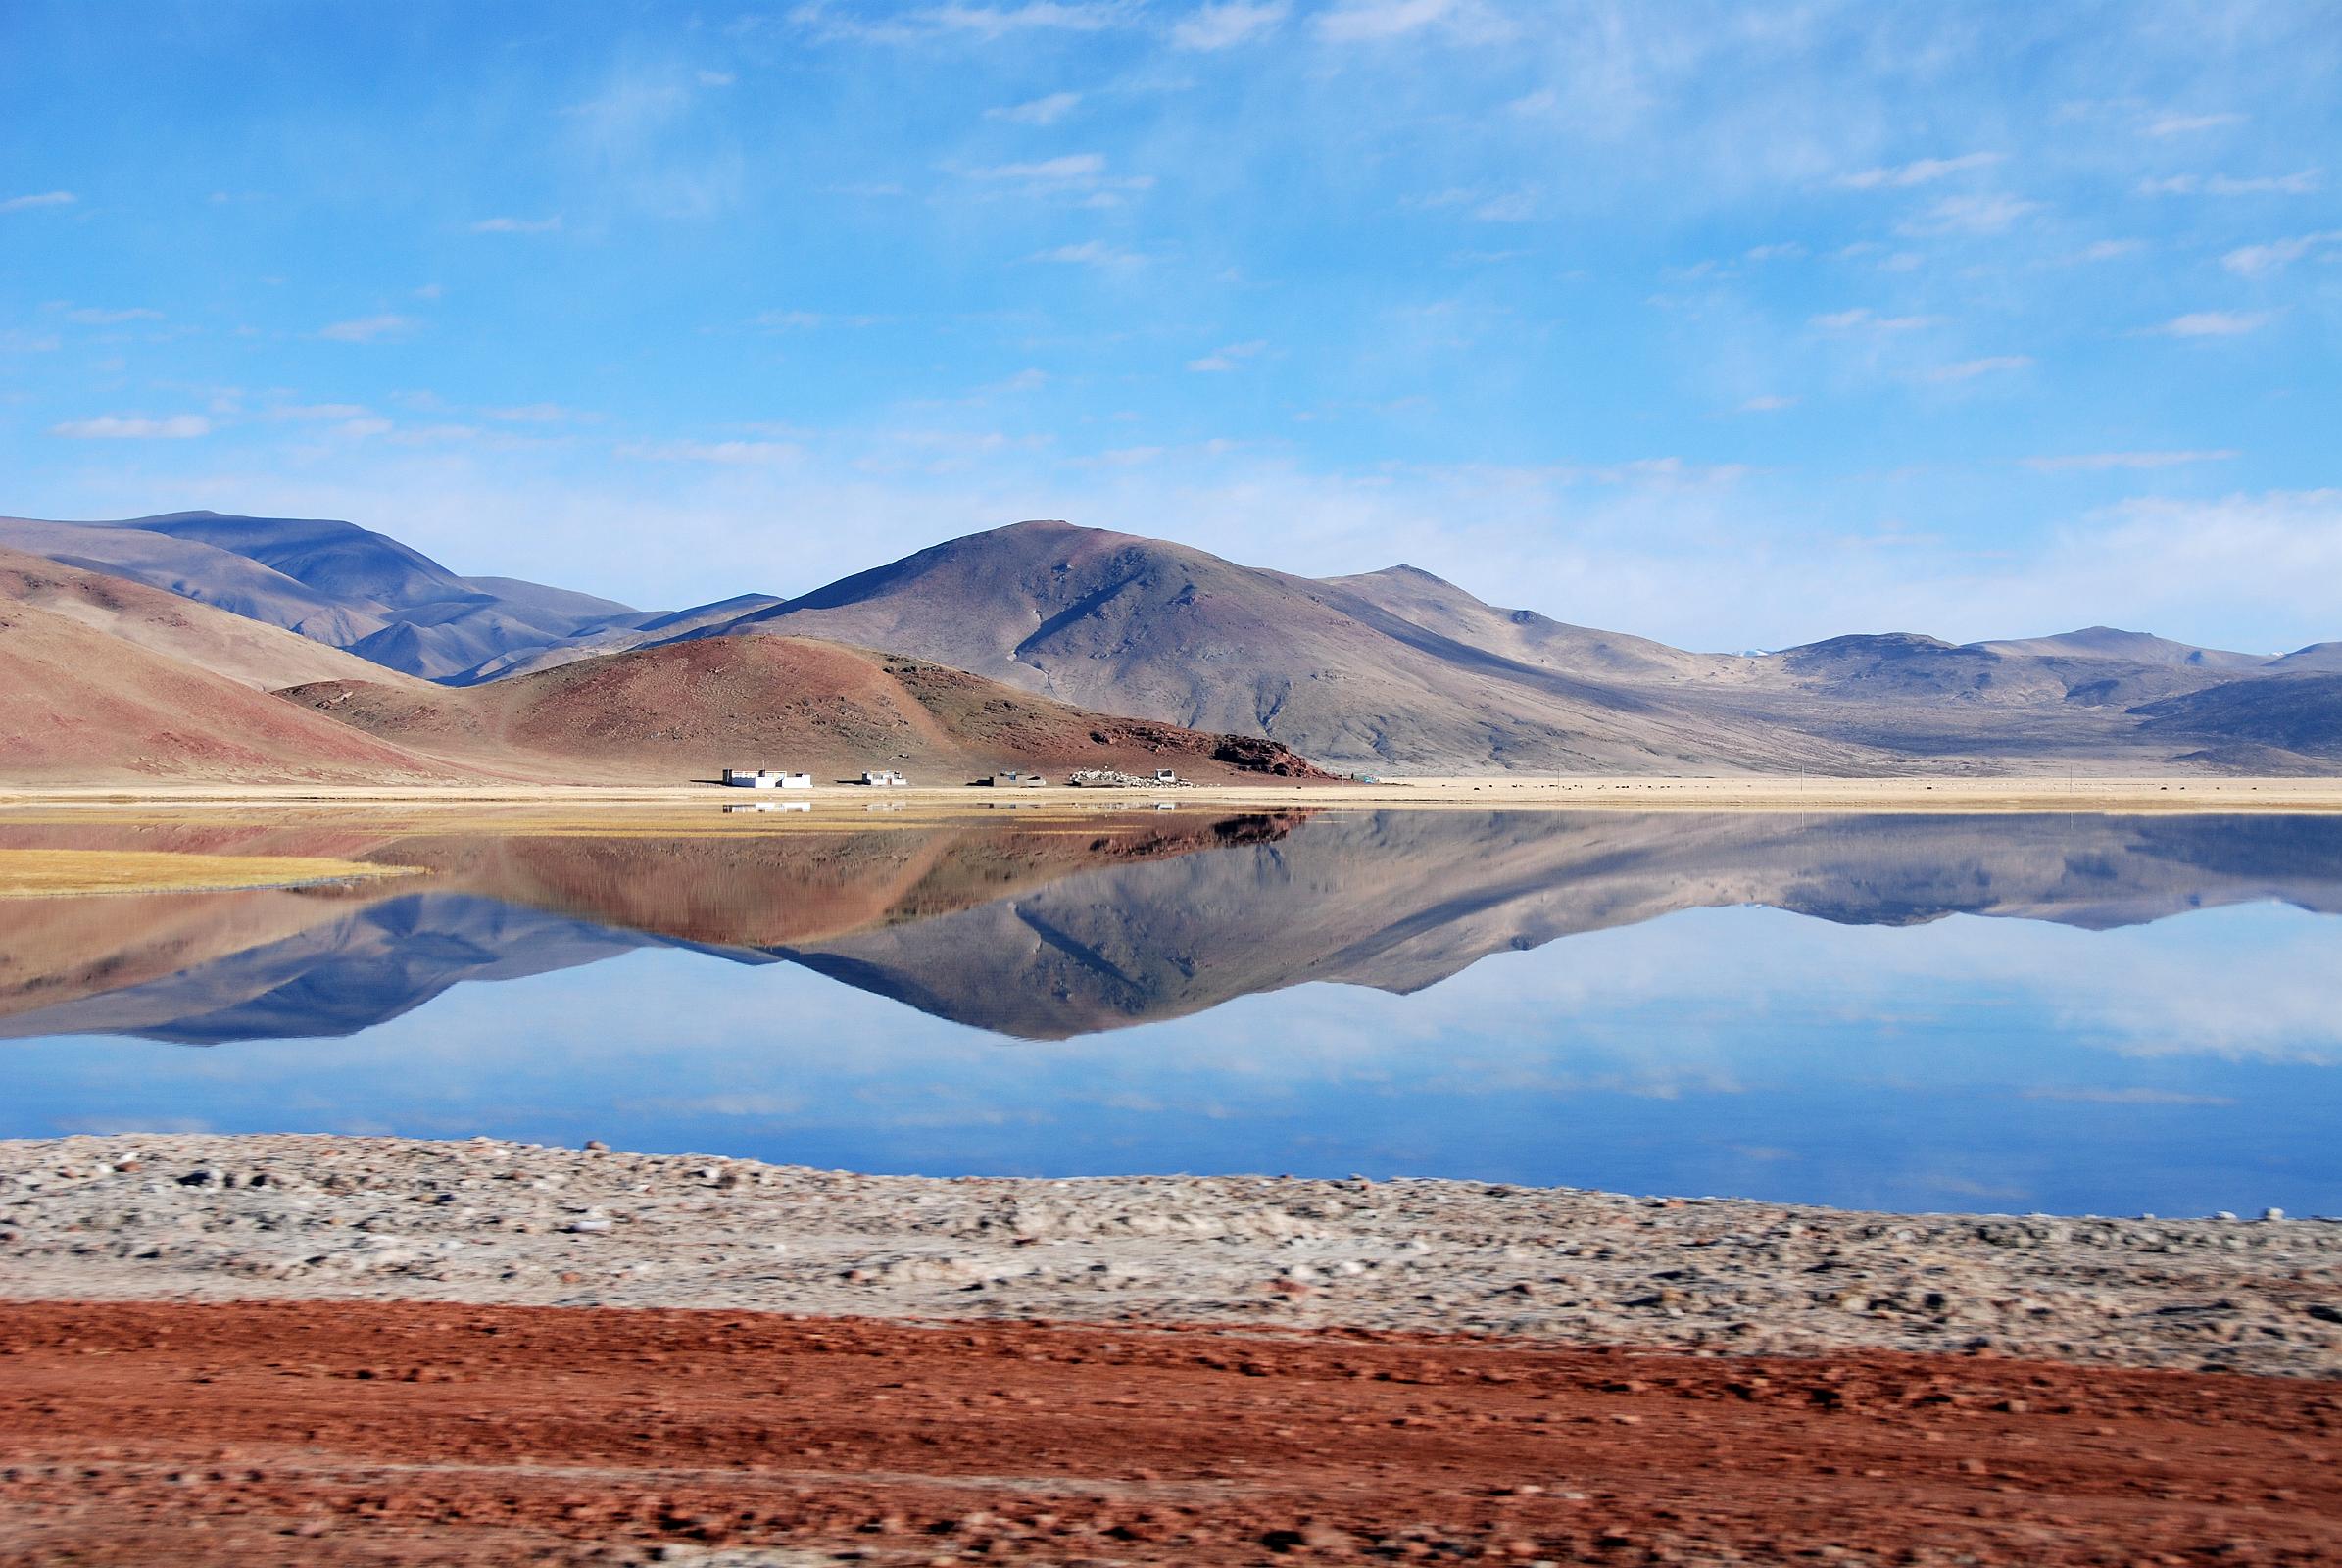 39 Hills Reflect Perfectly In The Water Just After Leaving Paryang Tibet For Mount Kailash The colourful hills of Tibet reflect perfectly in the water after leaving Paryang Tibet for Mount Kailash.